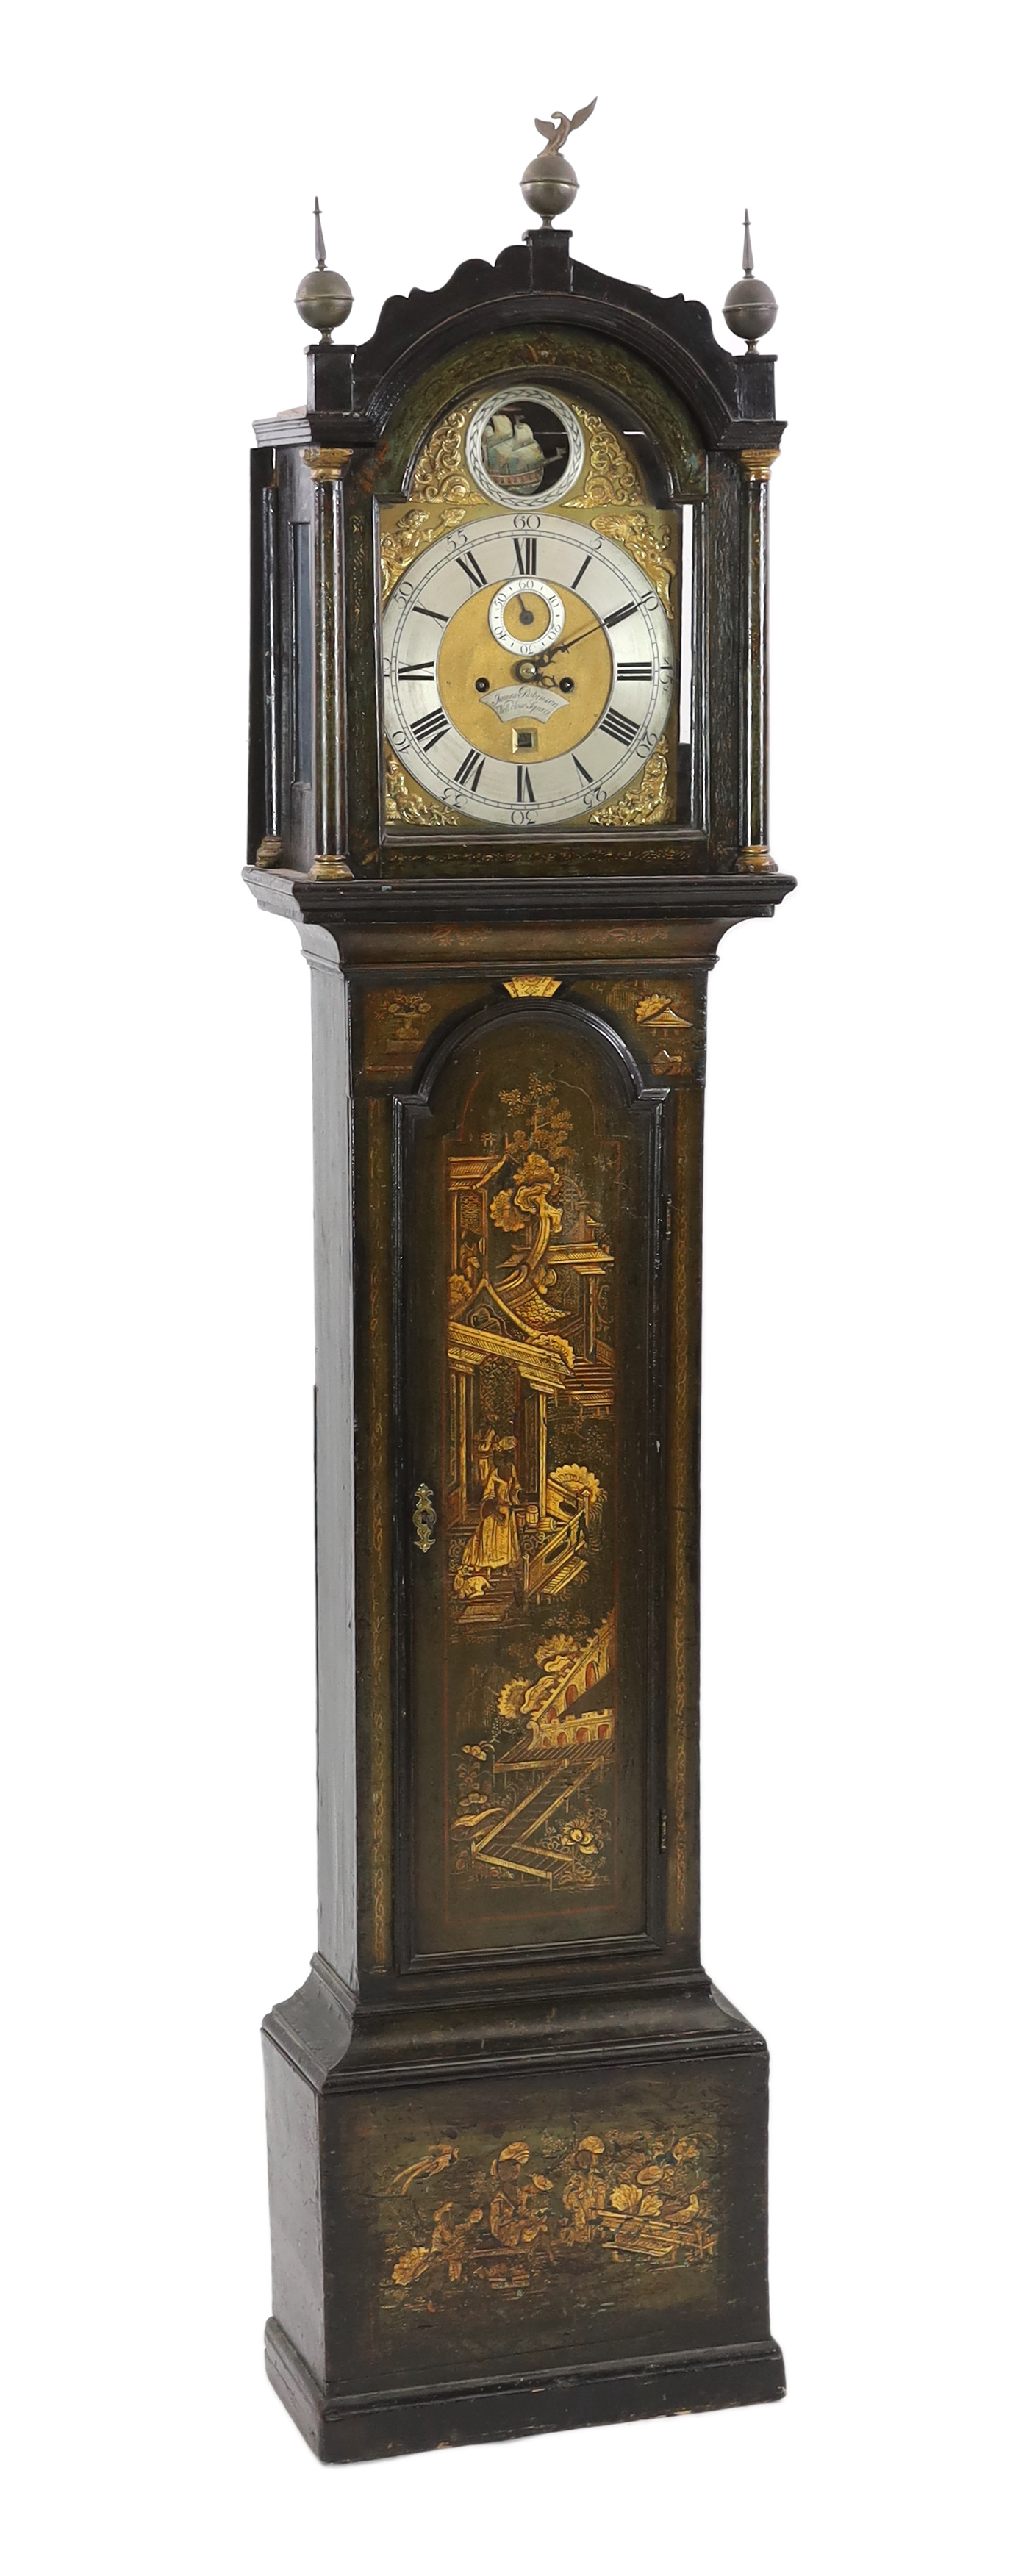 James Robinson of Well Close Square, a George III black japanned eight day longcase clock, the 30cm arched brass dial with ship automaton, figural seasons spandrels, subsidiary seconds and date aperture, the case with ch